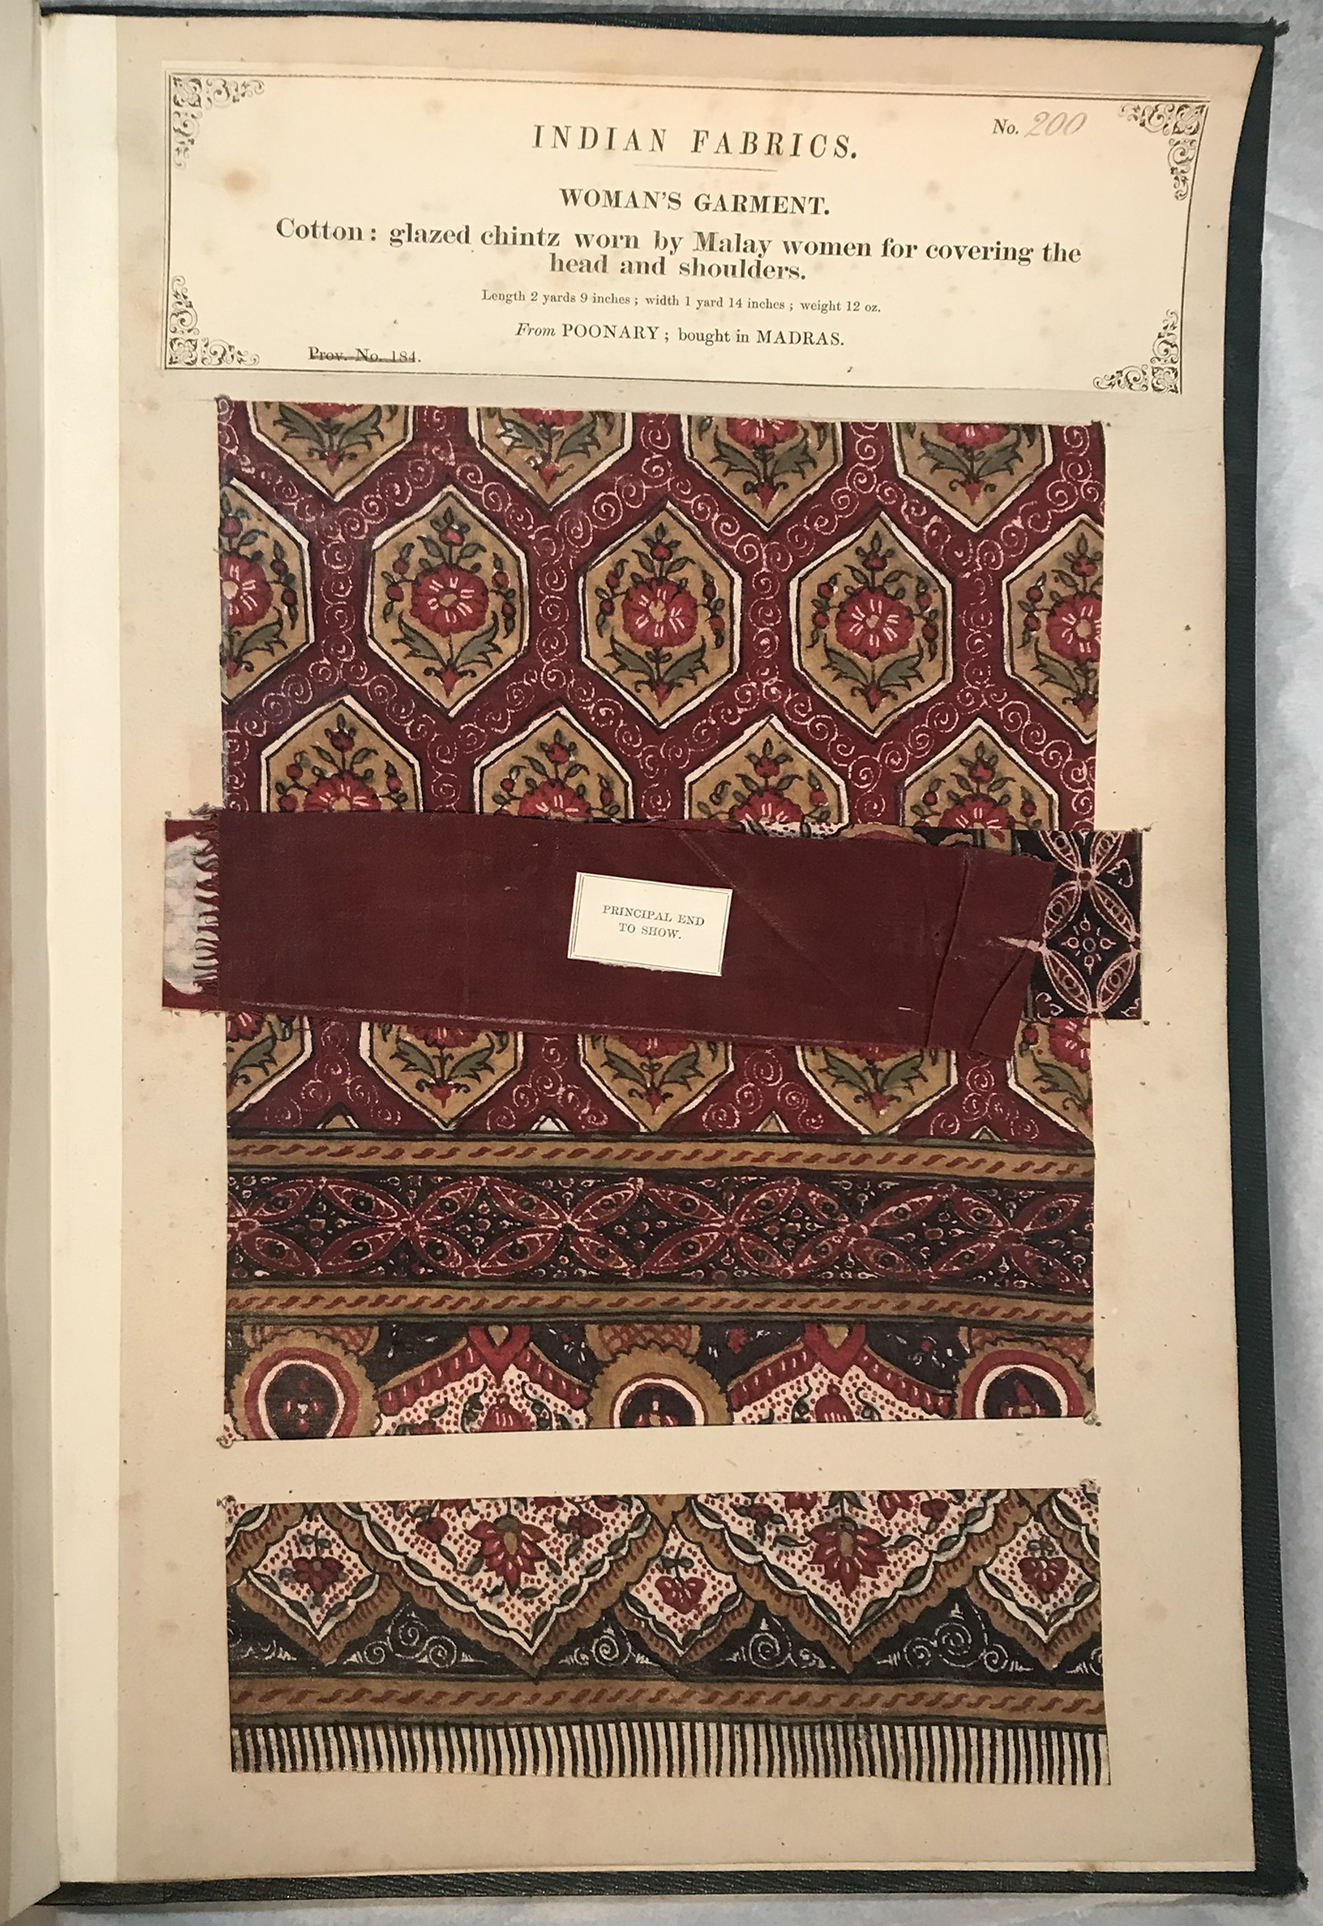 A page of a book displaying a burgundy patterned textile piece.